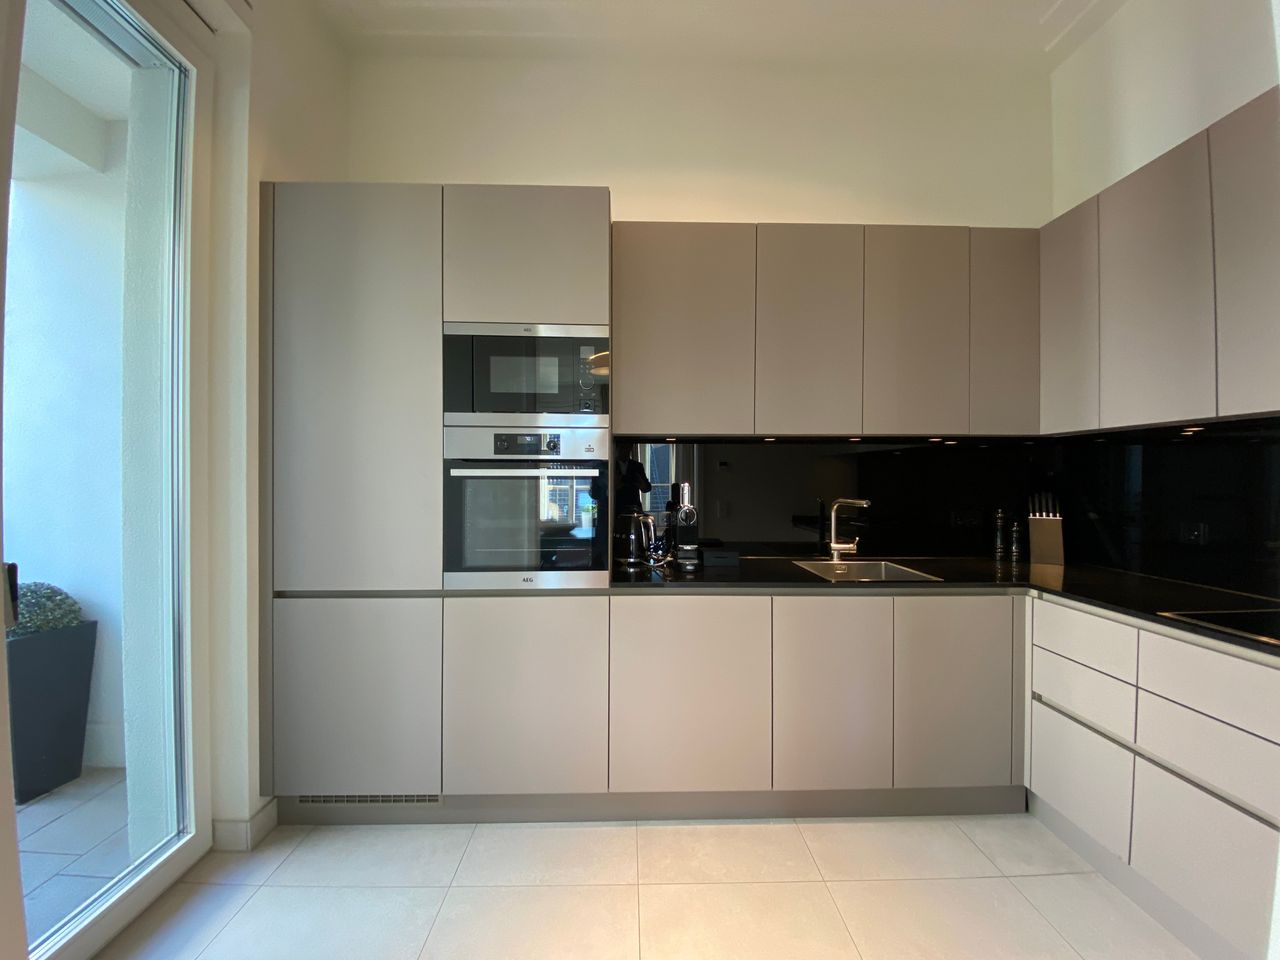 Luxury apartment in the middle of Düsseldorf city center, all inclusive!